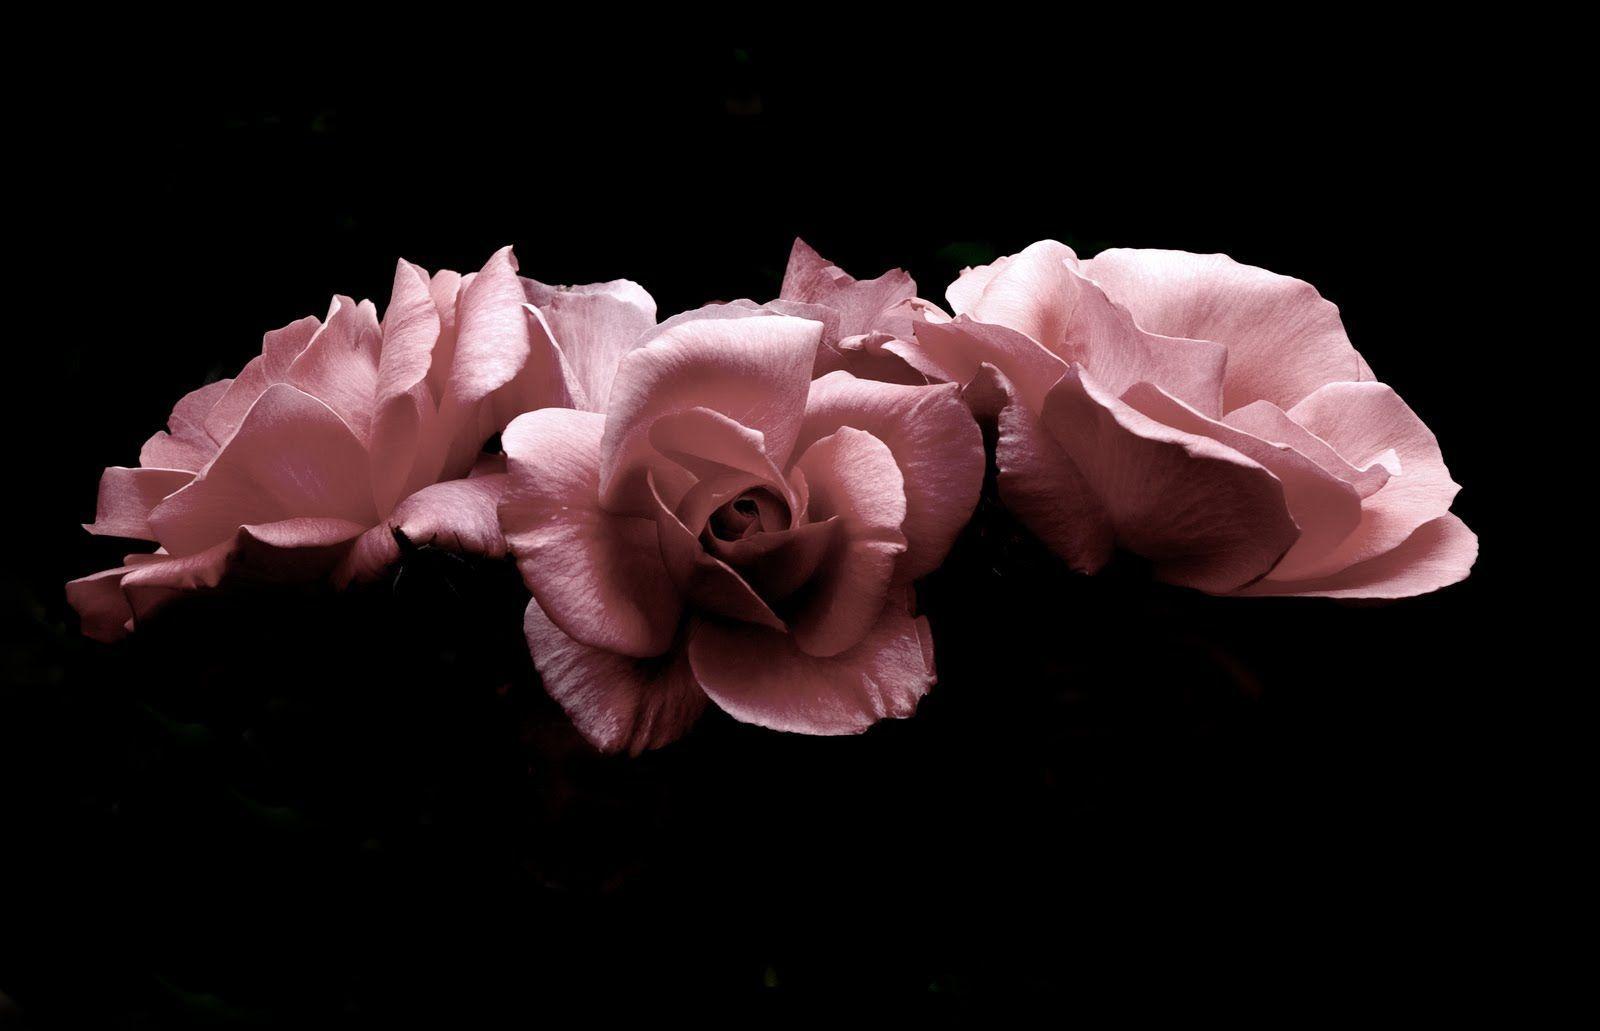 Erling Steen Photography: All kinds of Roses